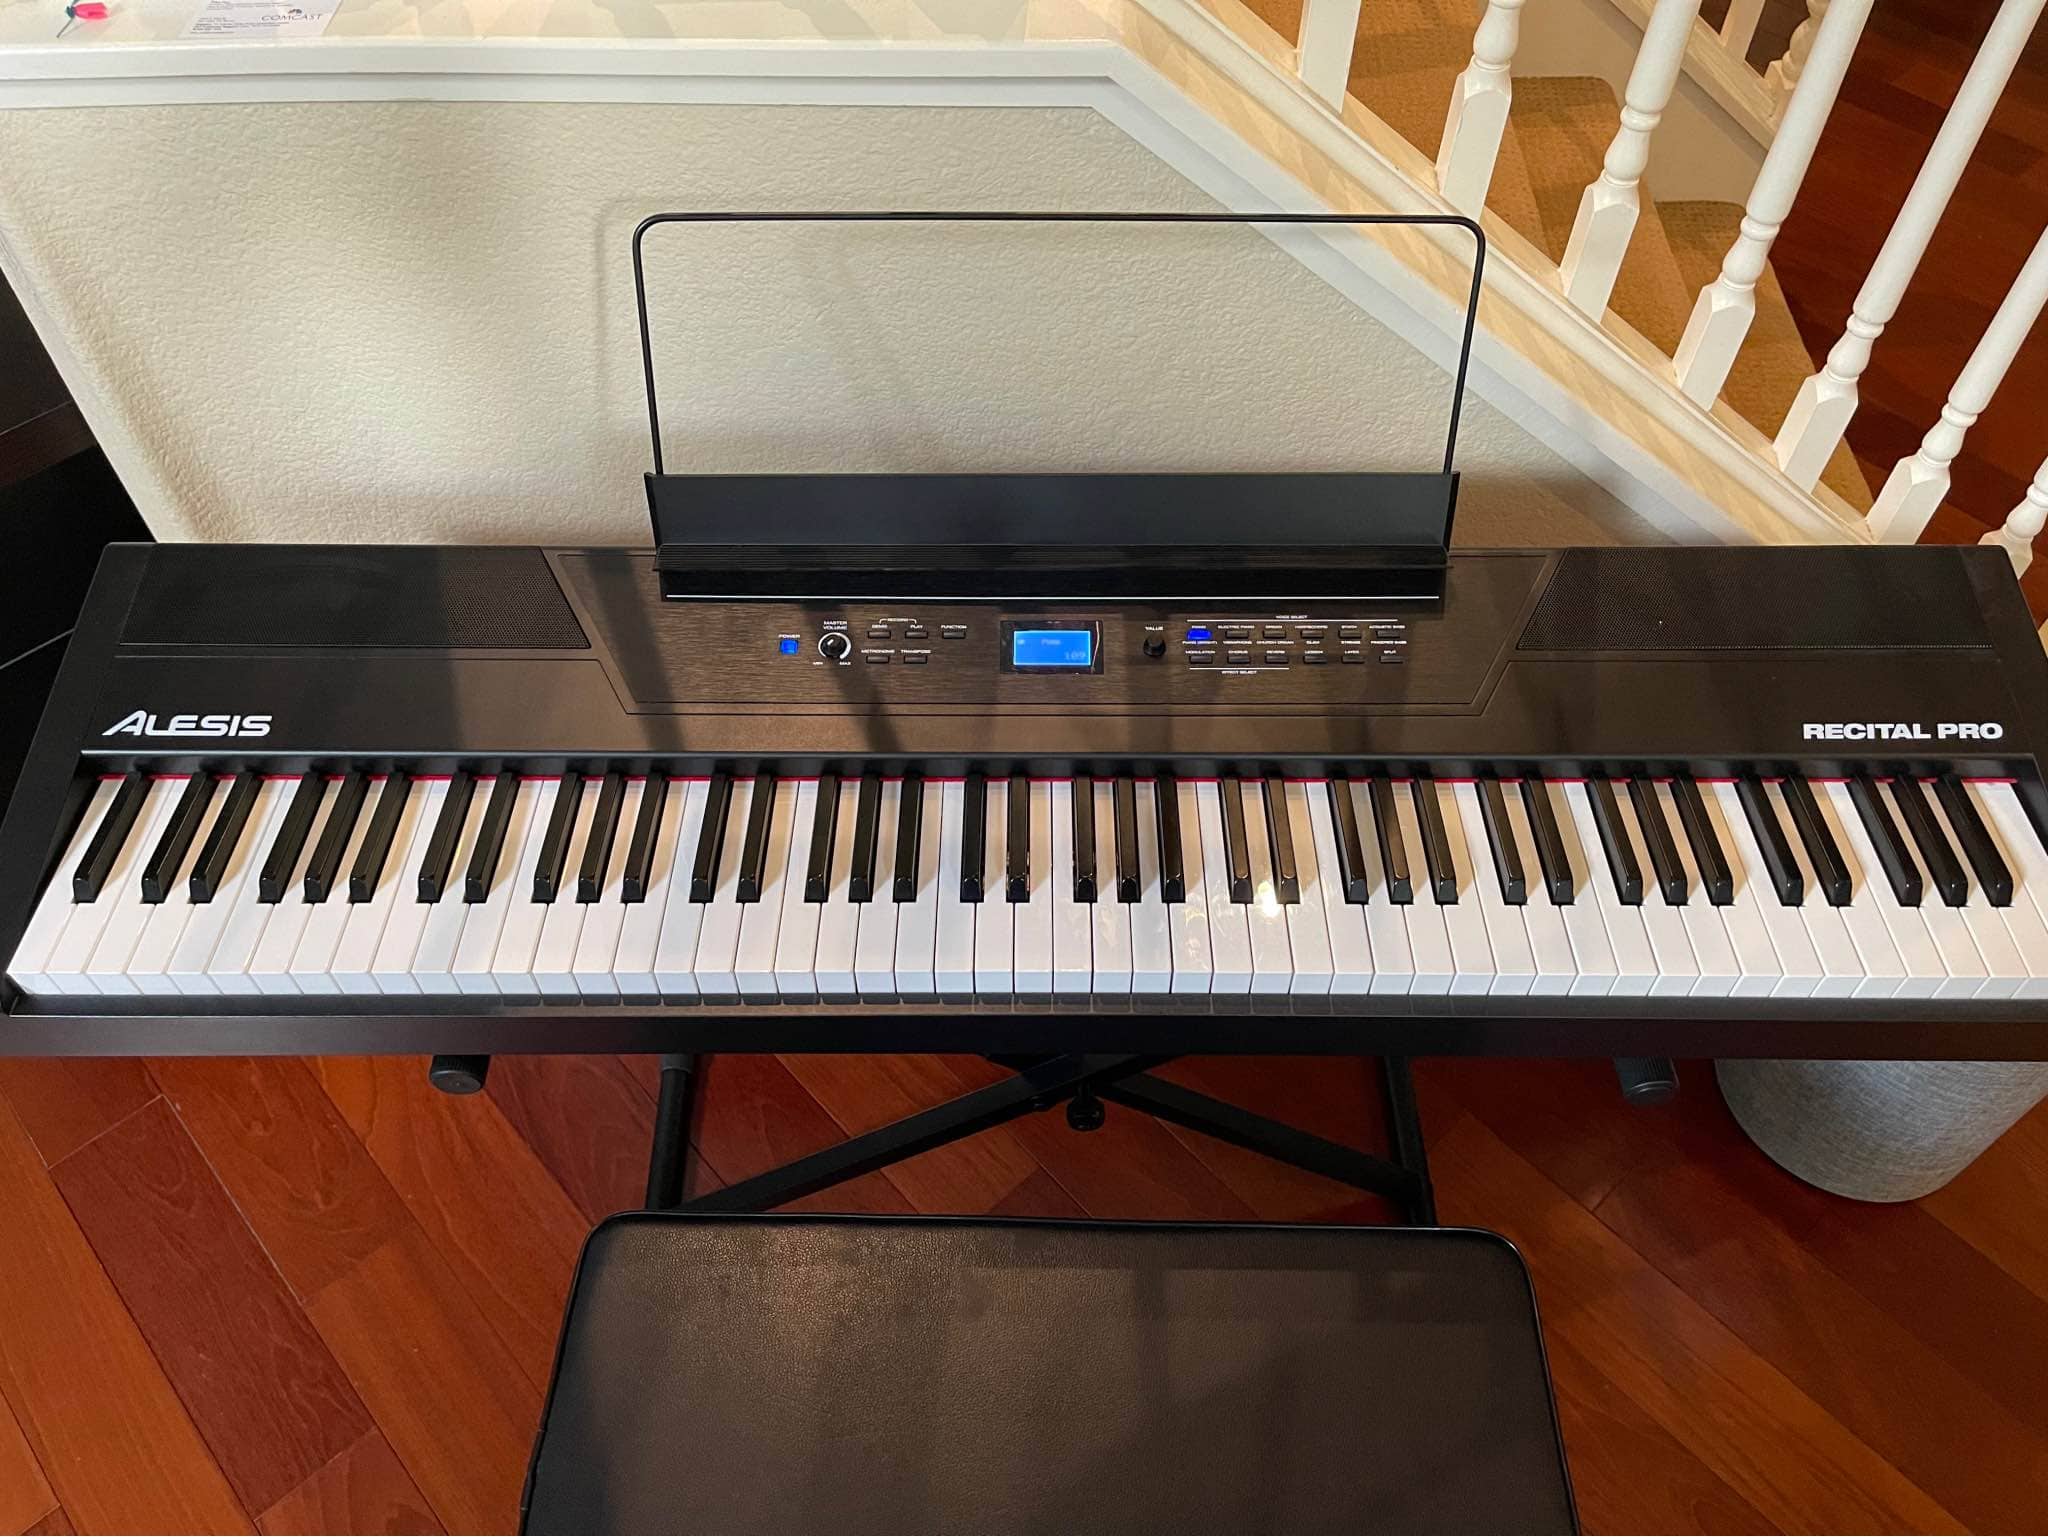 The Alesis Recital Pro features both dual mode and  duo mode